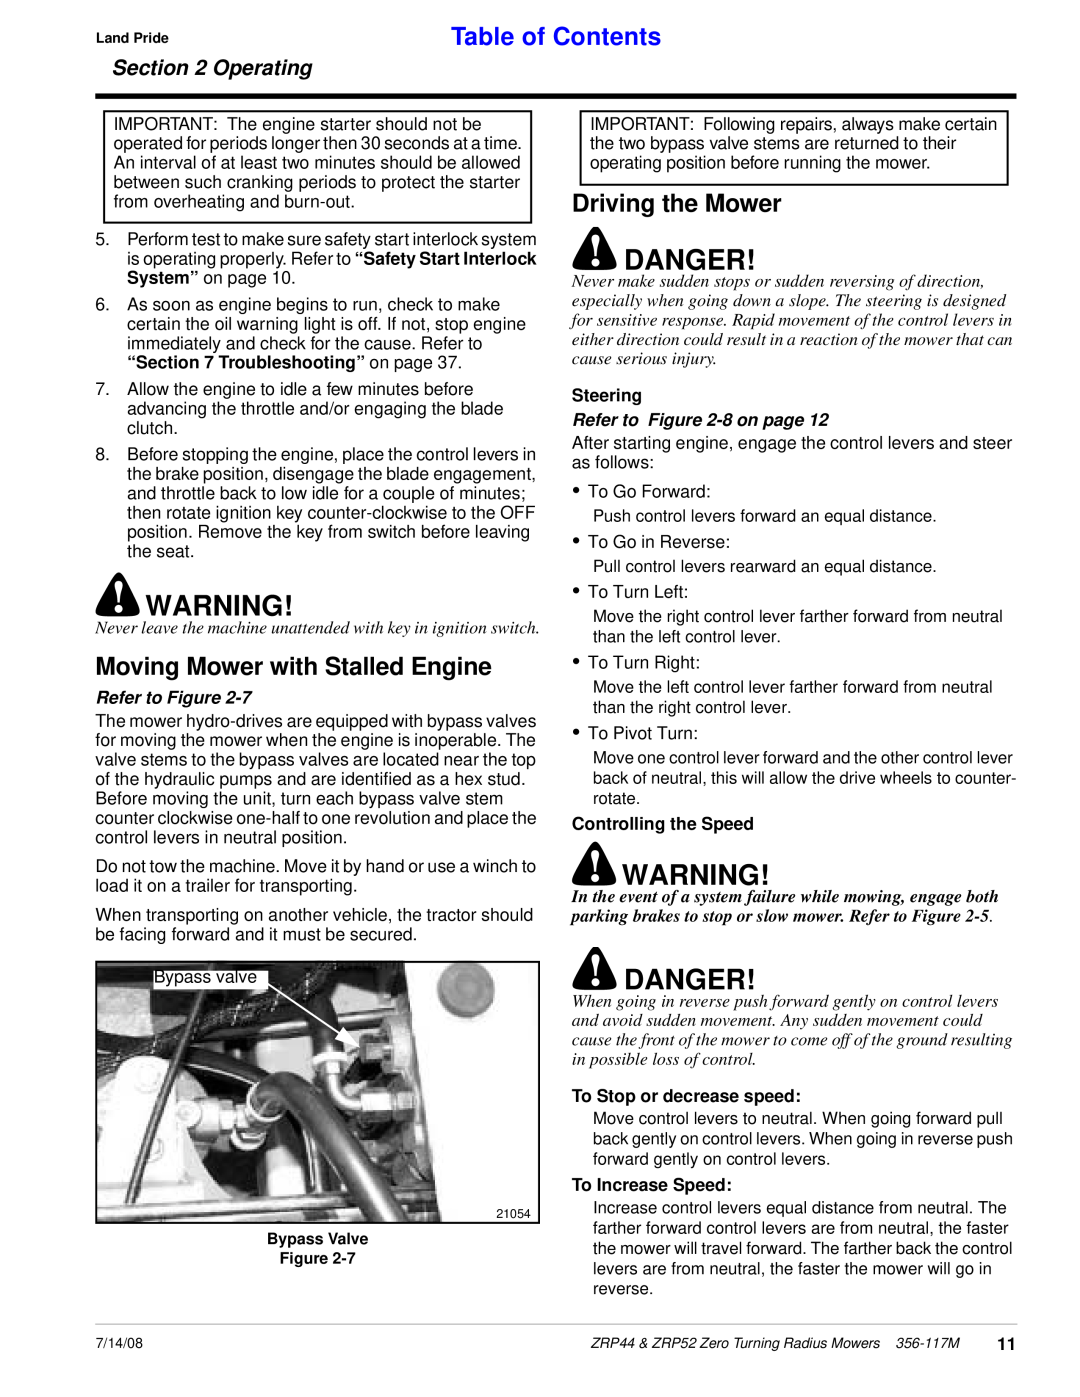 Land Pride ZRP44, ZRP52 Danger, Driving the Mower, Moving Mower with Stalled Engine, Refer to -8on page, Table of Contents 